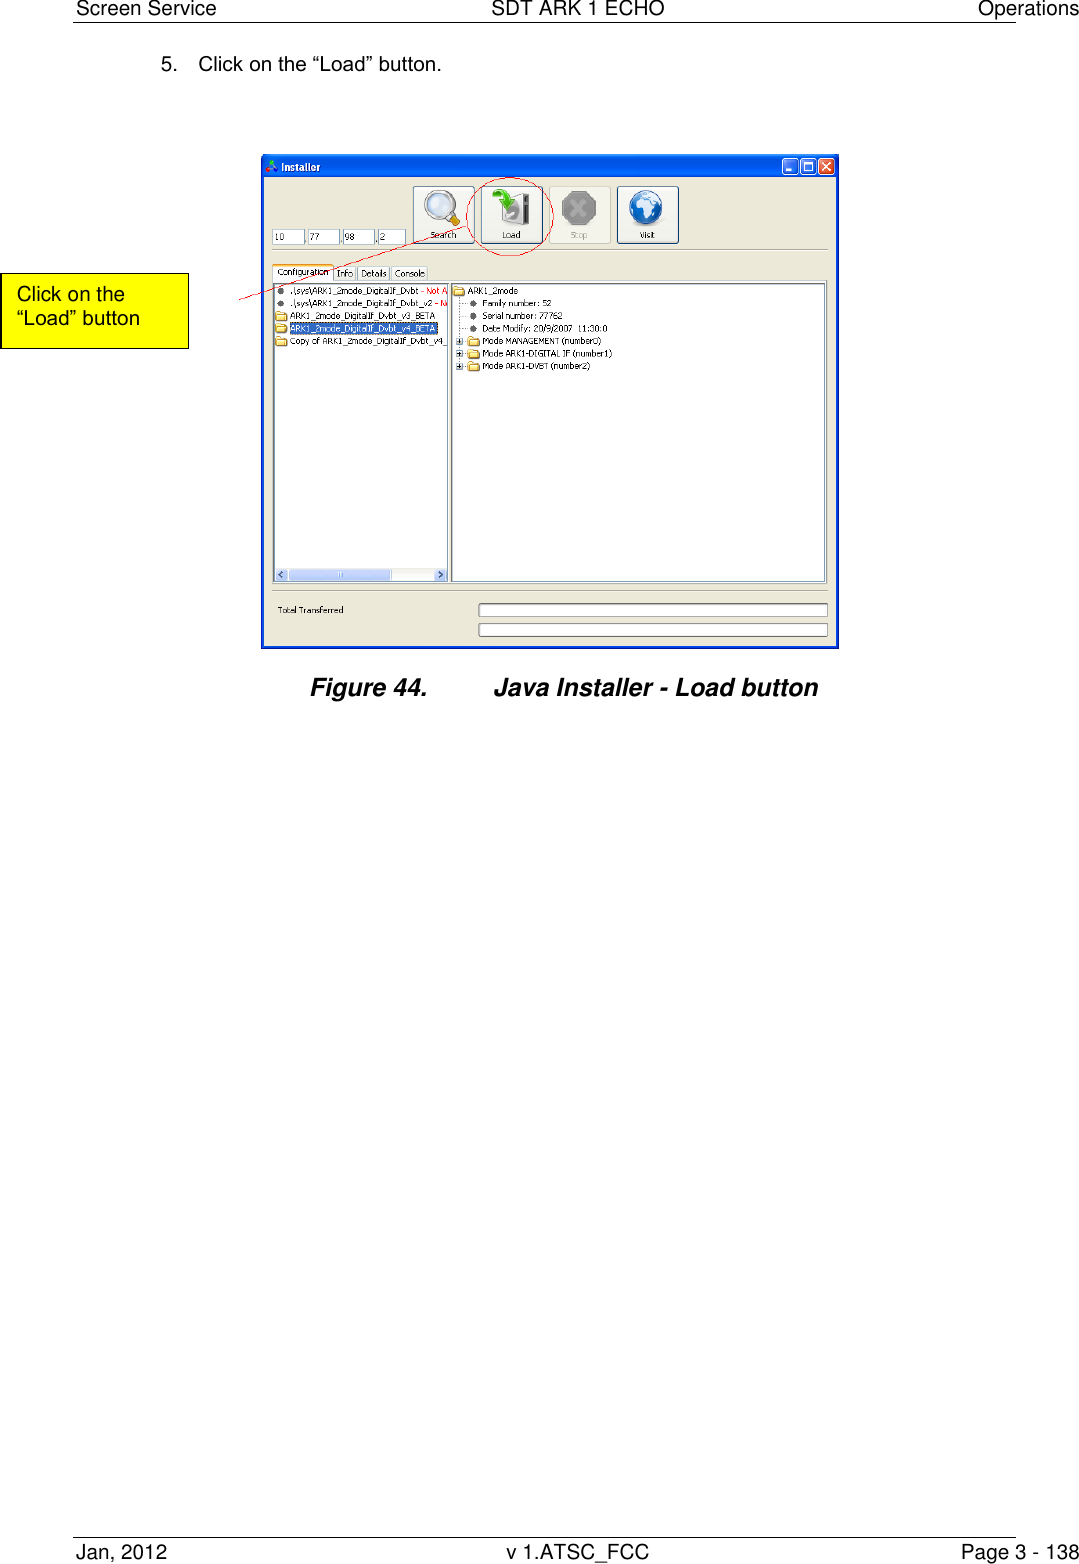 Screen Service  SDT ARK 1 ECHO  Operations Jan, 2012  v 1.ATSC_FCC  Page 3 - 138 5. Click on the “Load” button. Figure 44.  Java Installer - Load button   Click on the “Load” button  